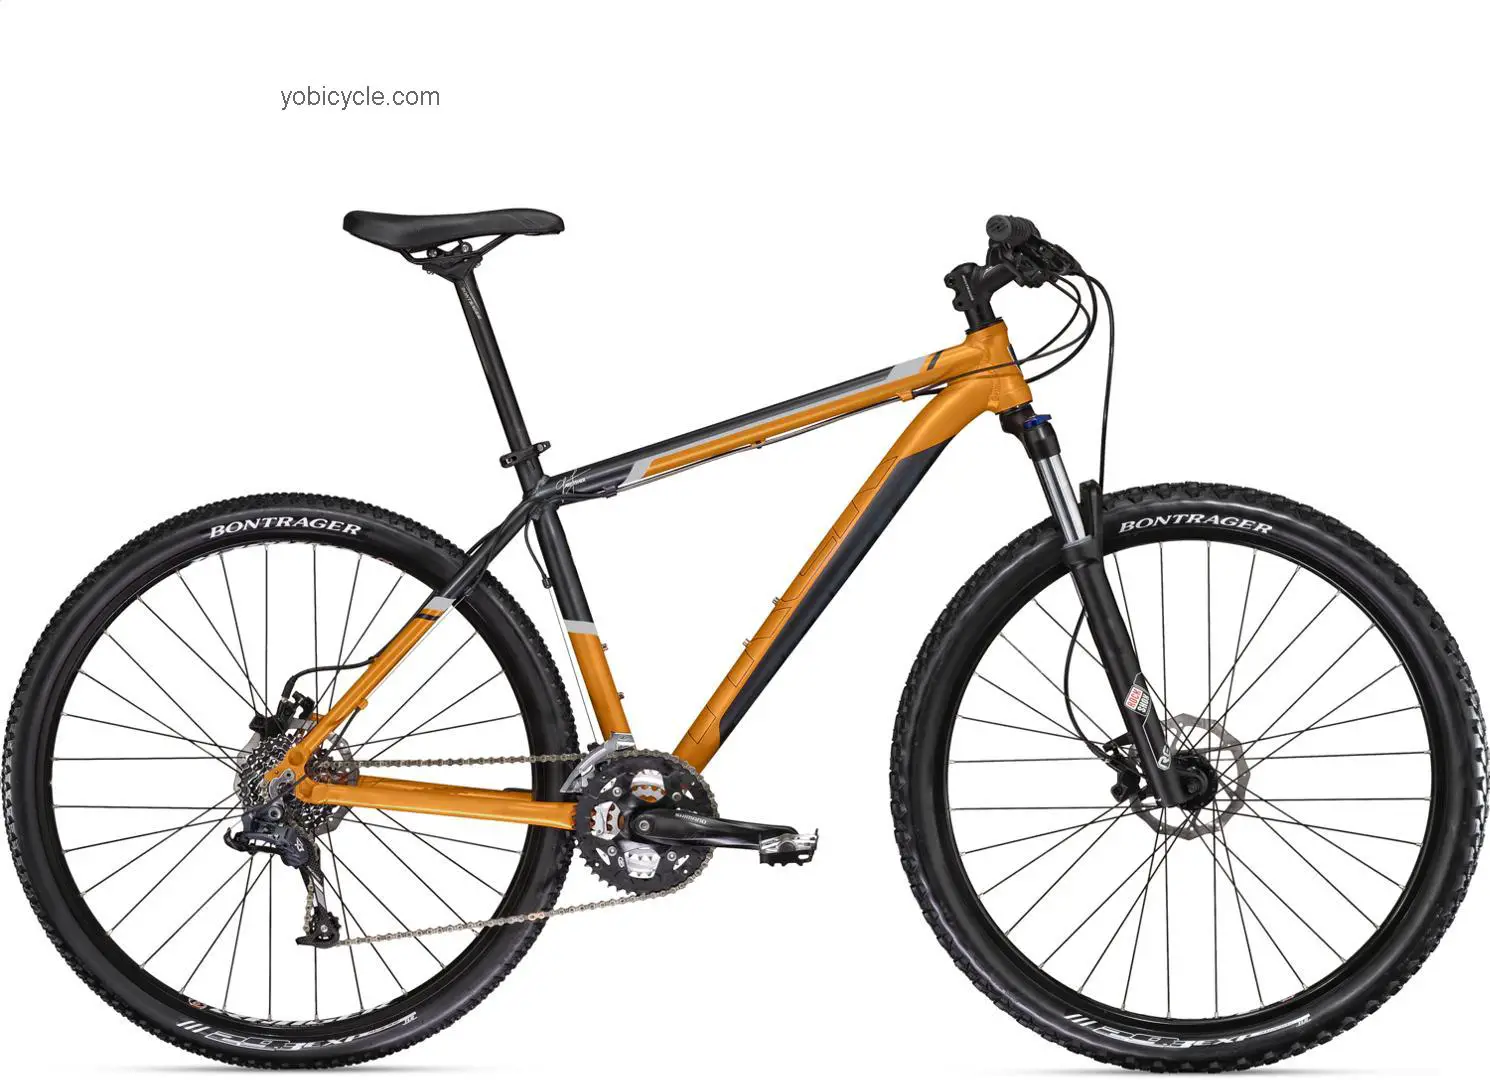 Trek Gary Fisher Cobia 2011 comparison online with competitors